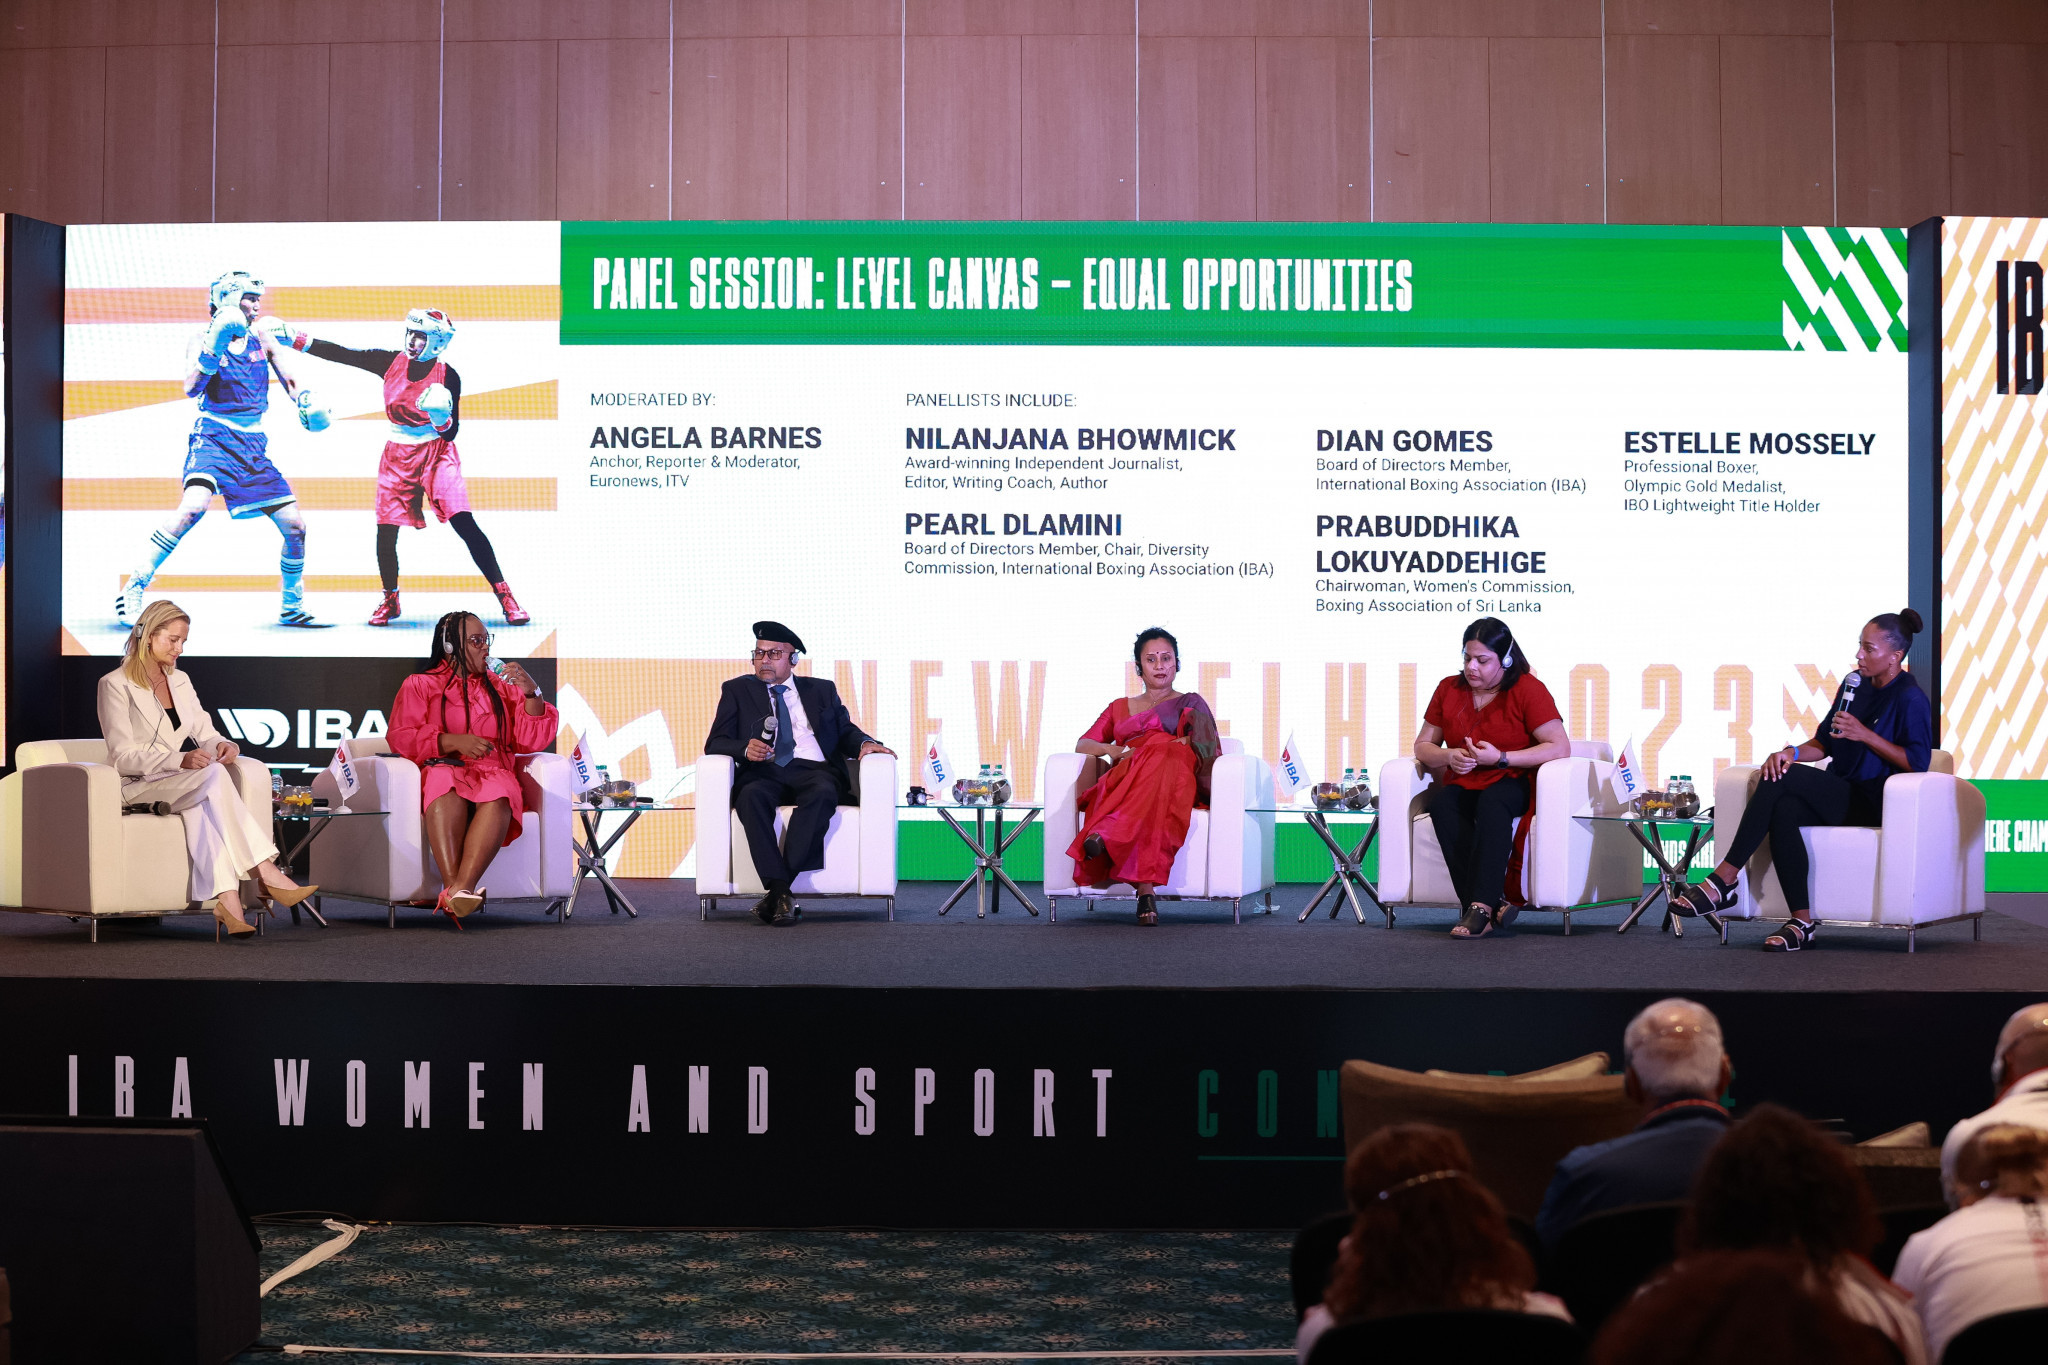 Olympic champion Mossely among speakers at IBA Women and Sport Conference